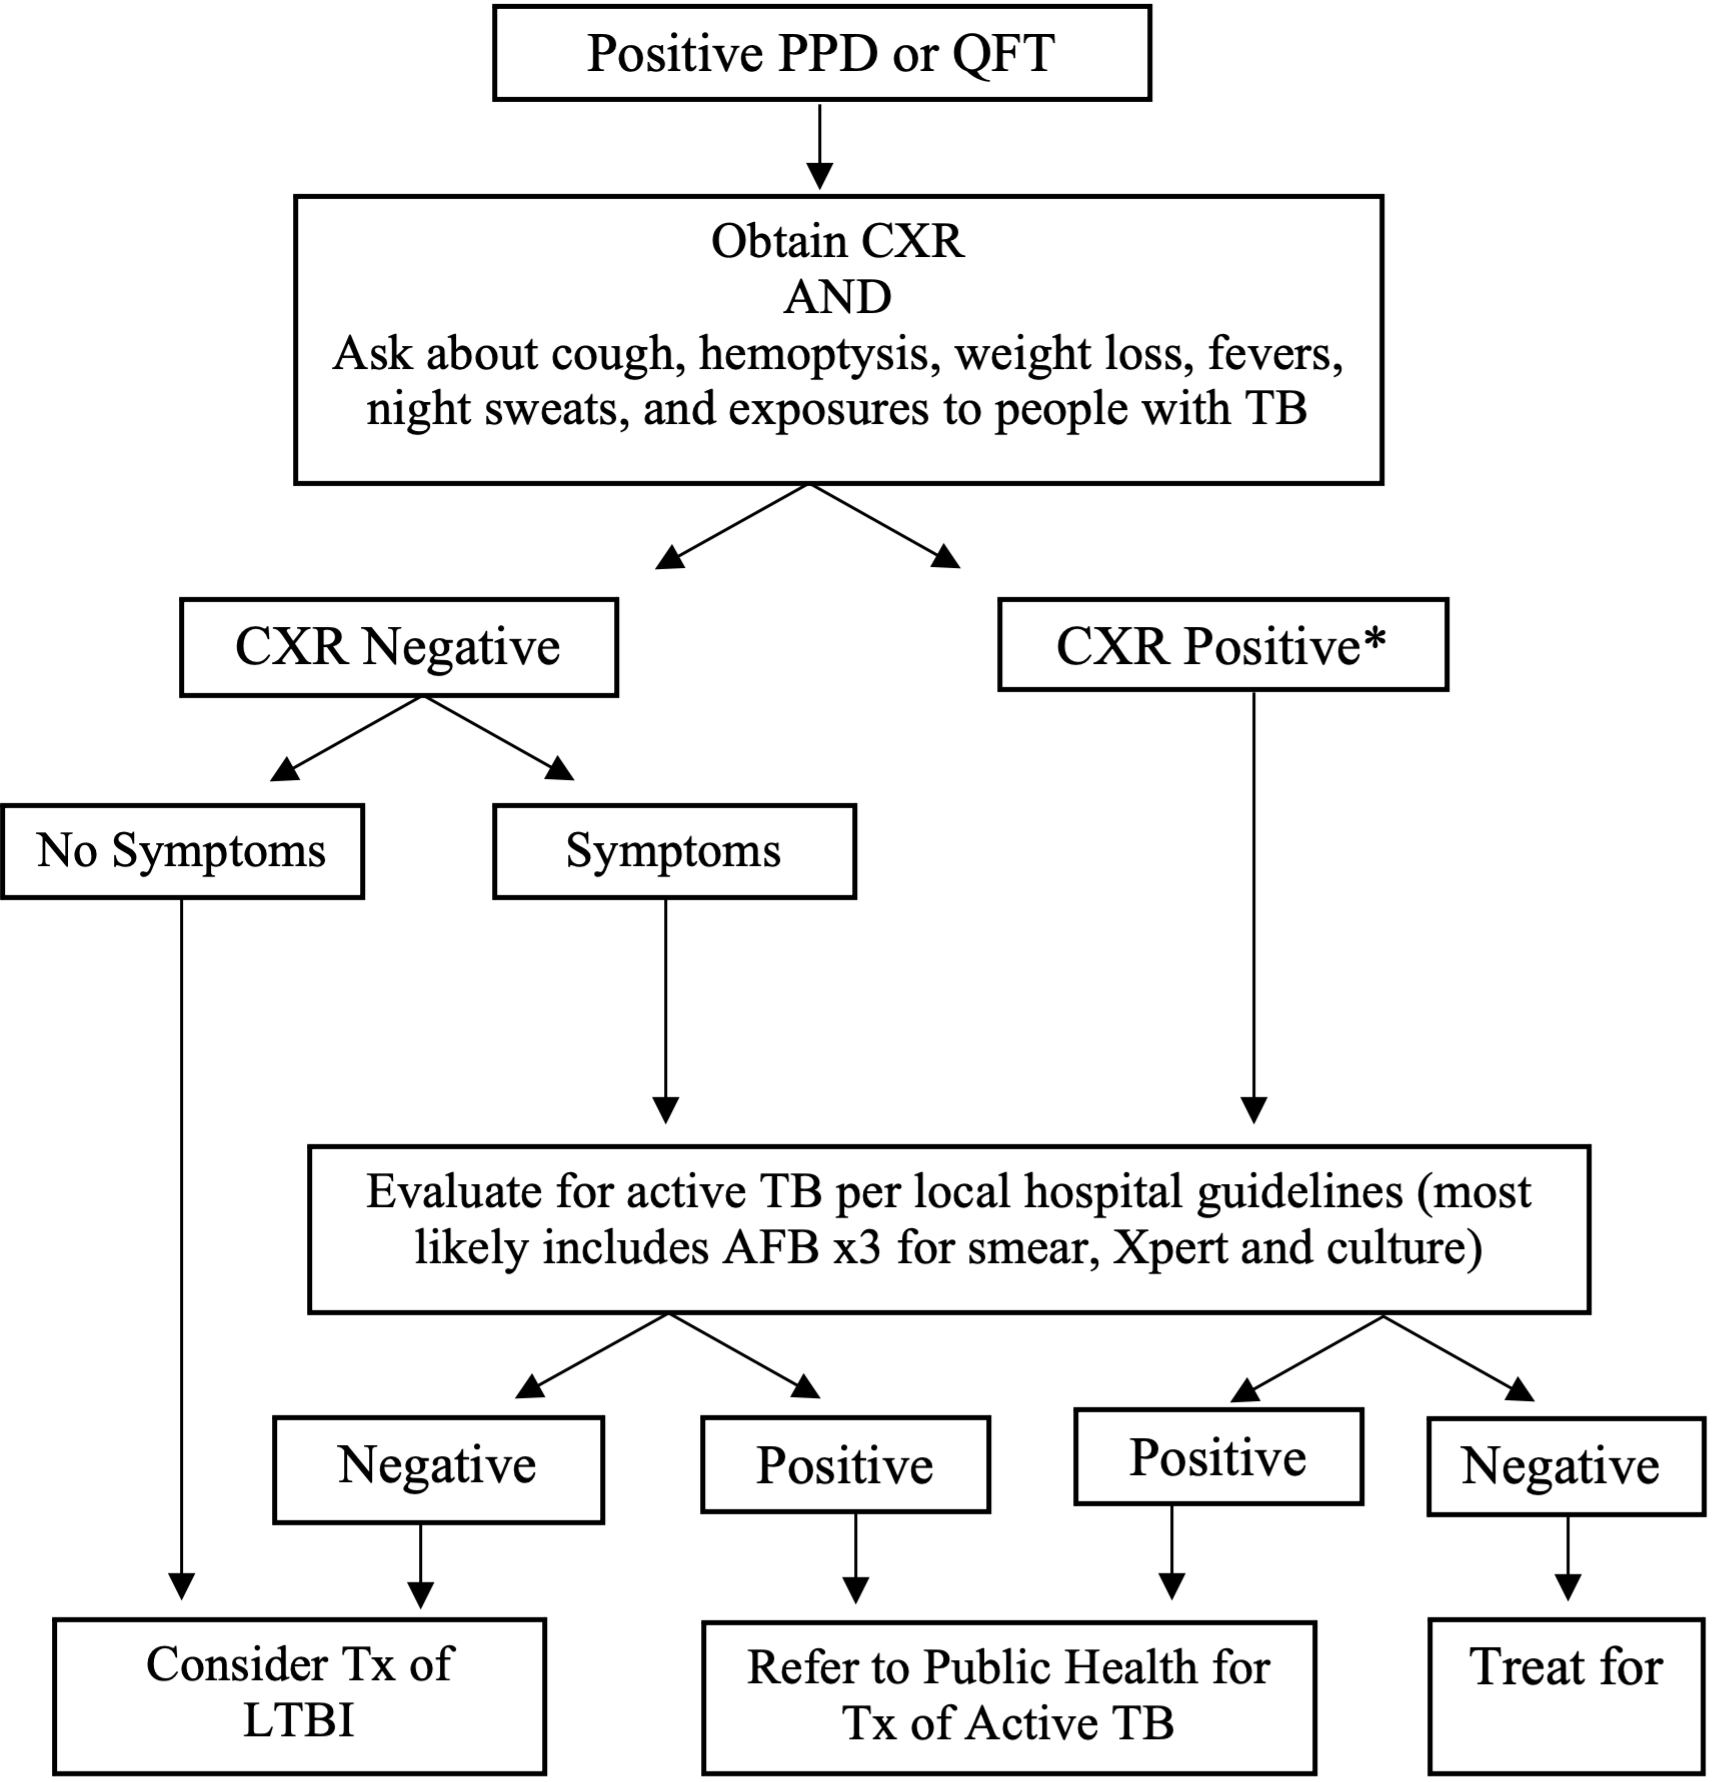 Management of Positive PPD or QFT: